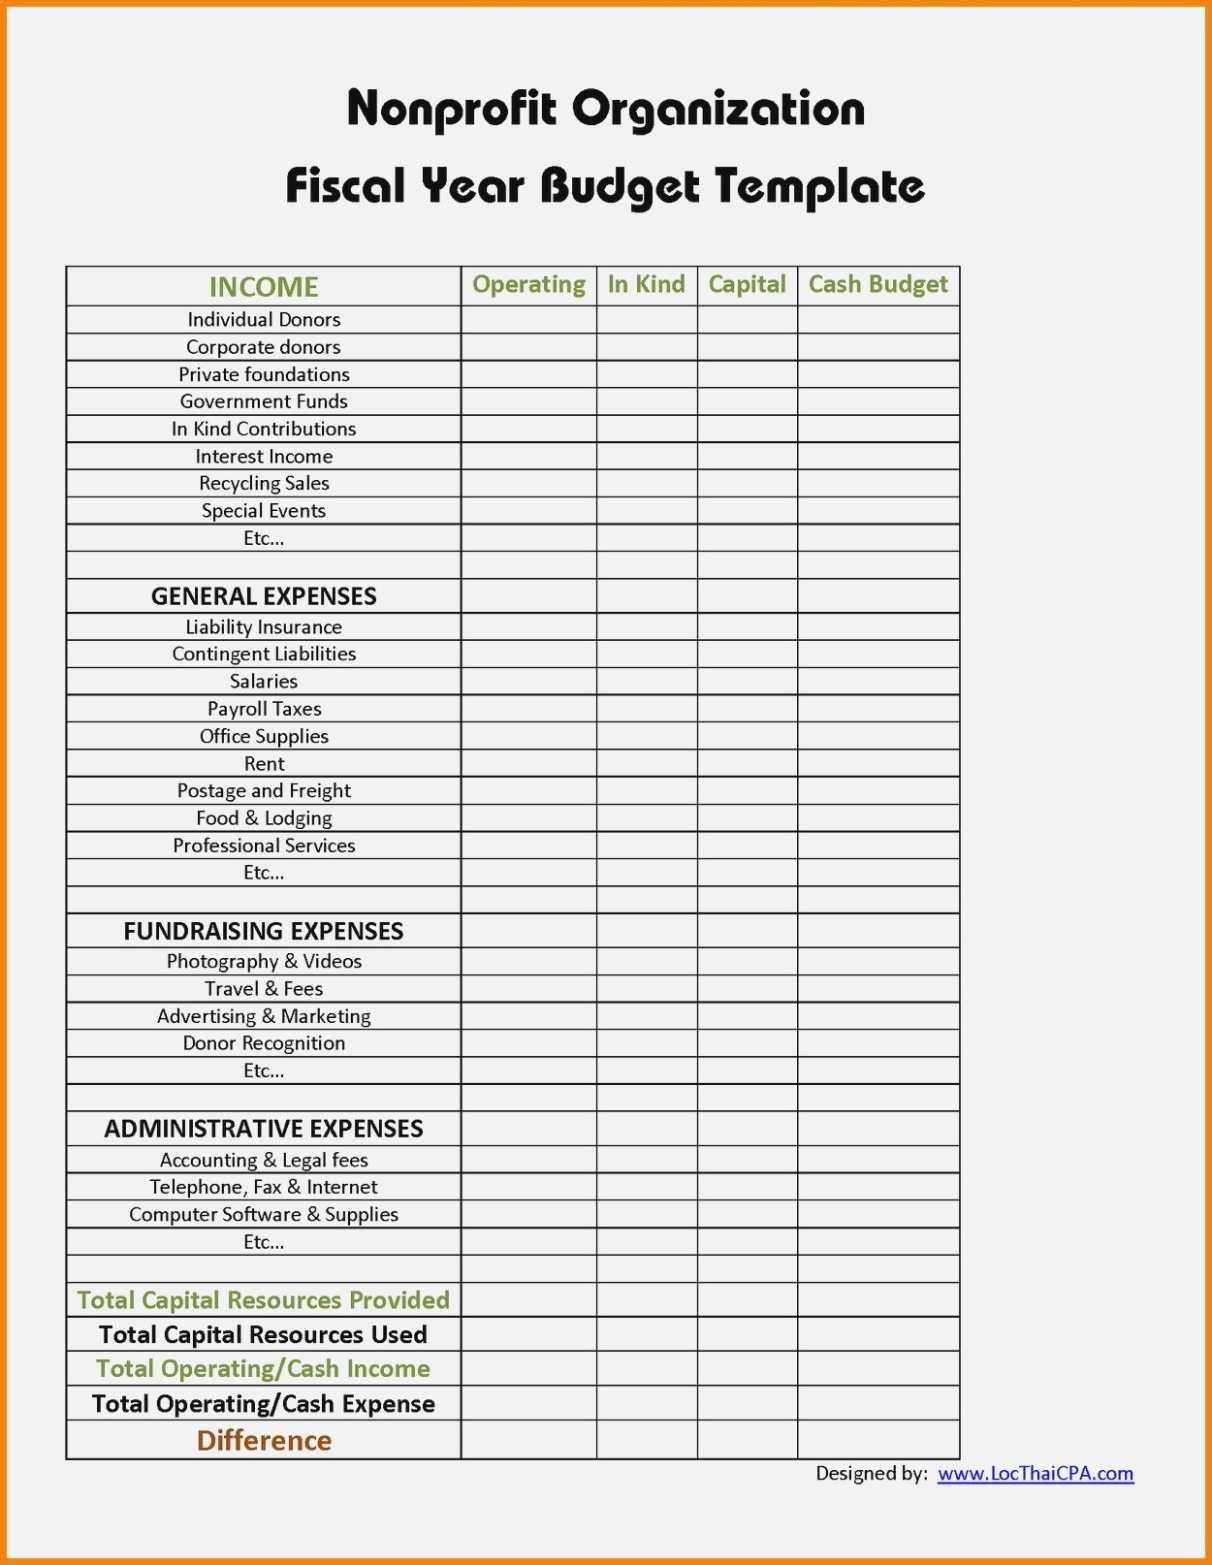 10 Treasurers Report Template | Resume Samples With Regard To Donation Report Template